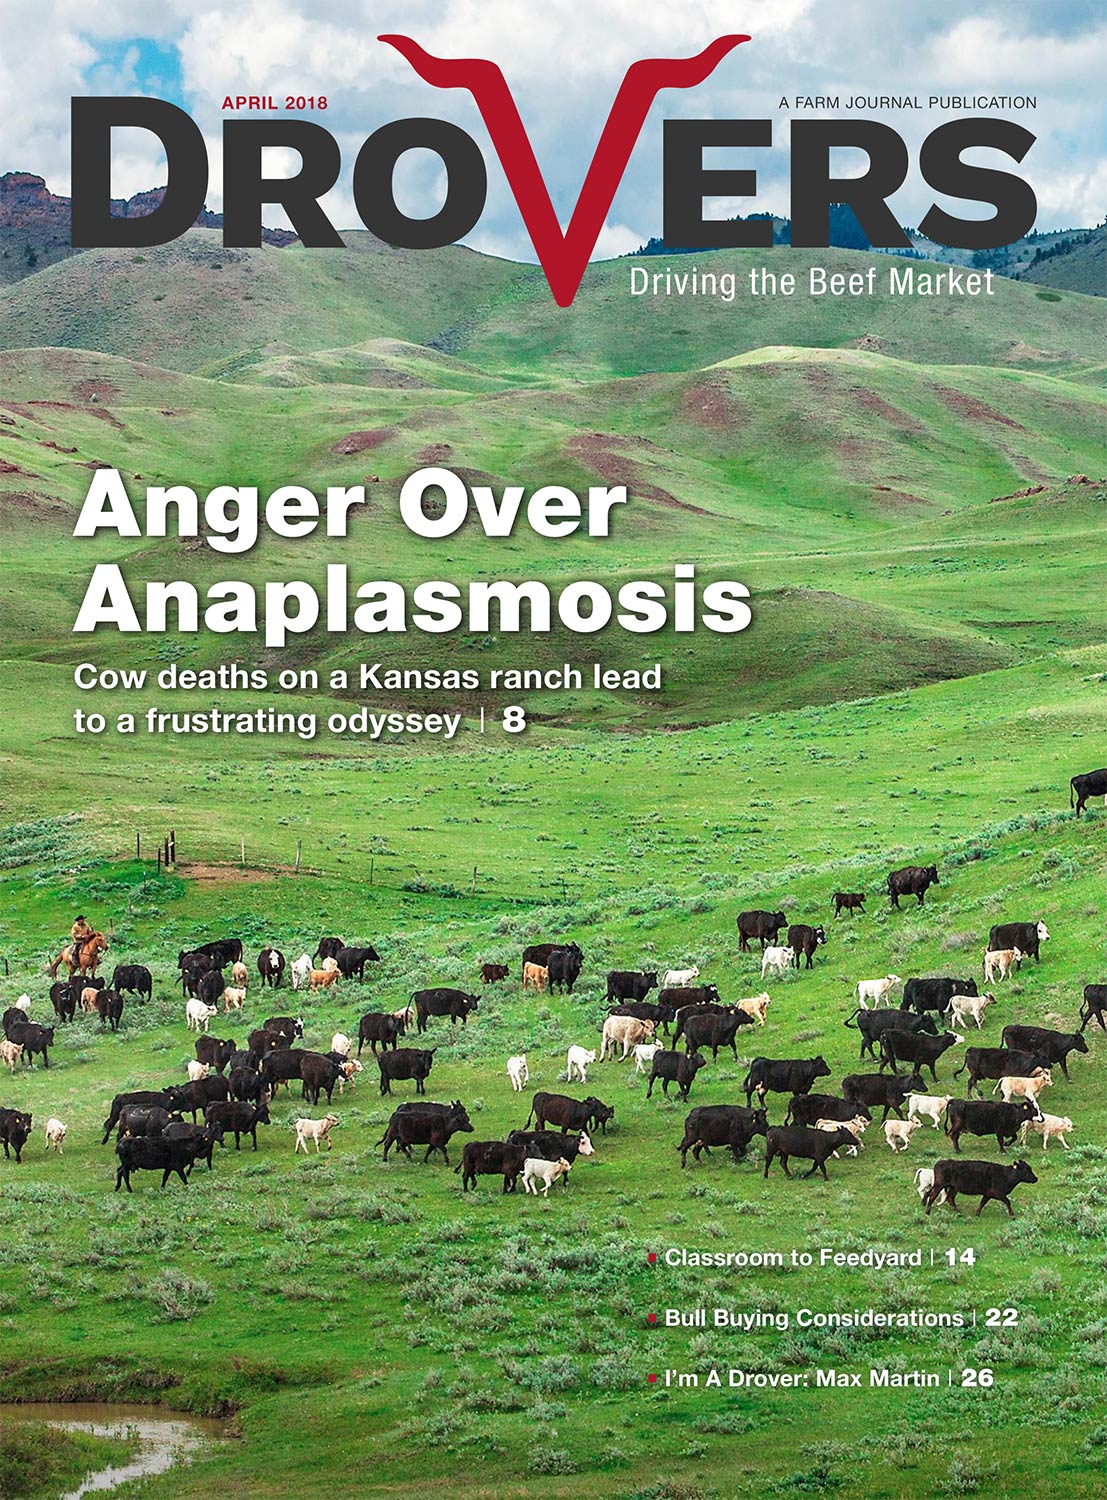 Cattle photography appears on cover of April 2018 issue of Drovers Magazine